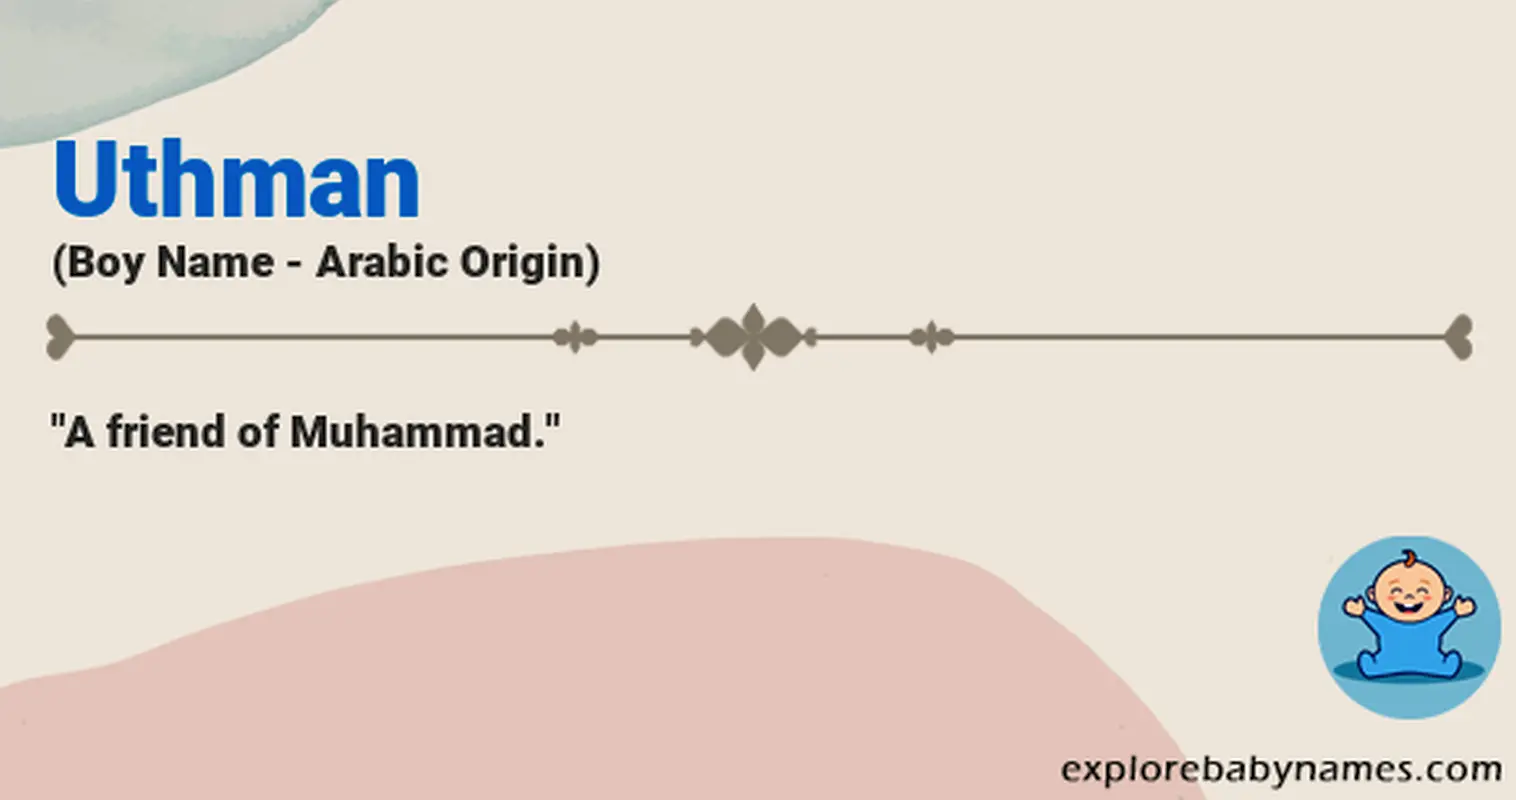 Meaning of Uthman